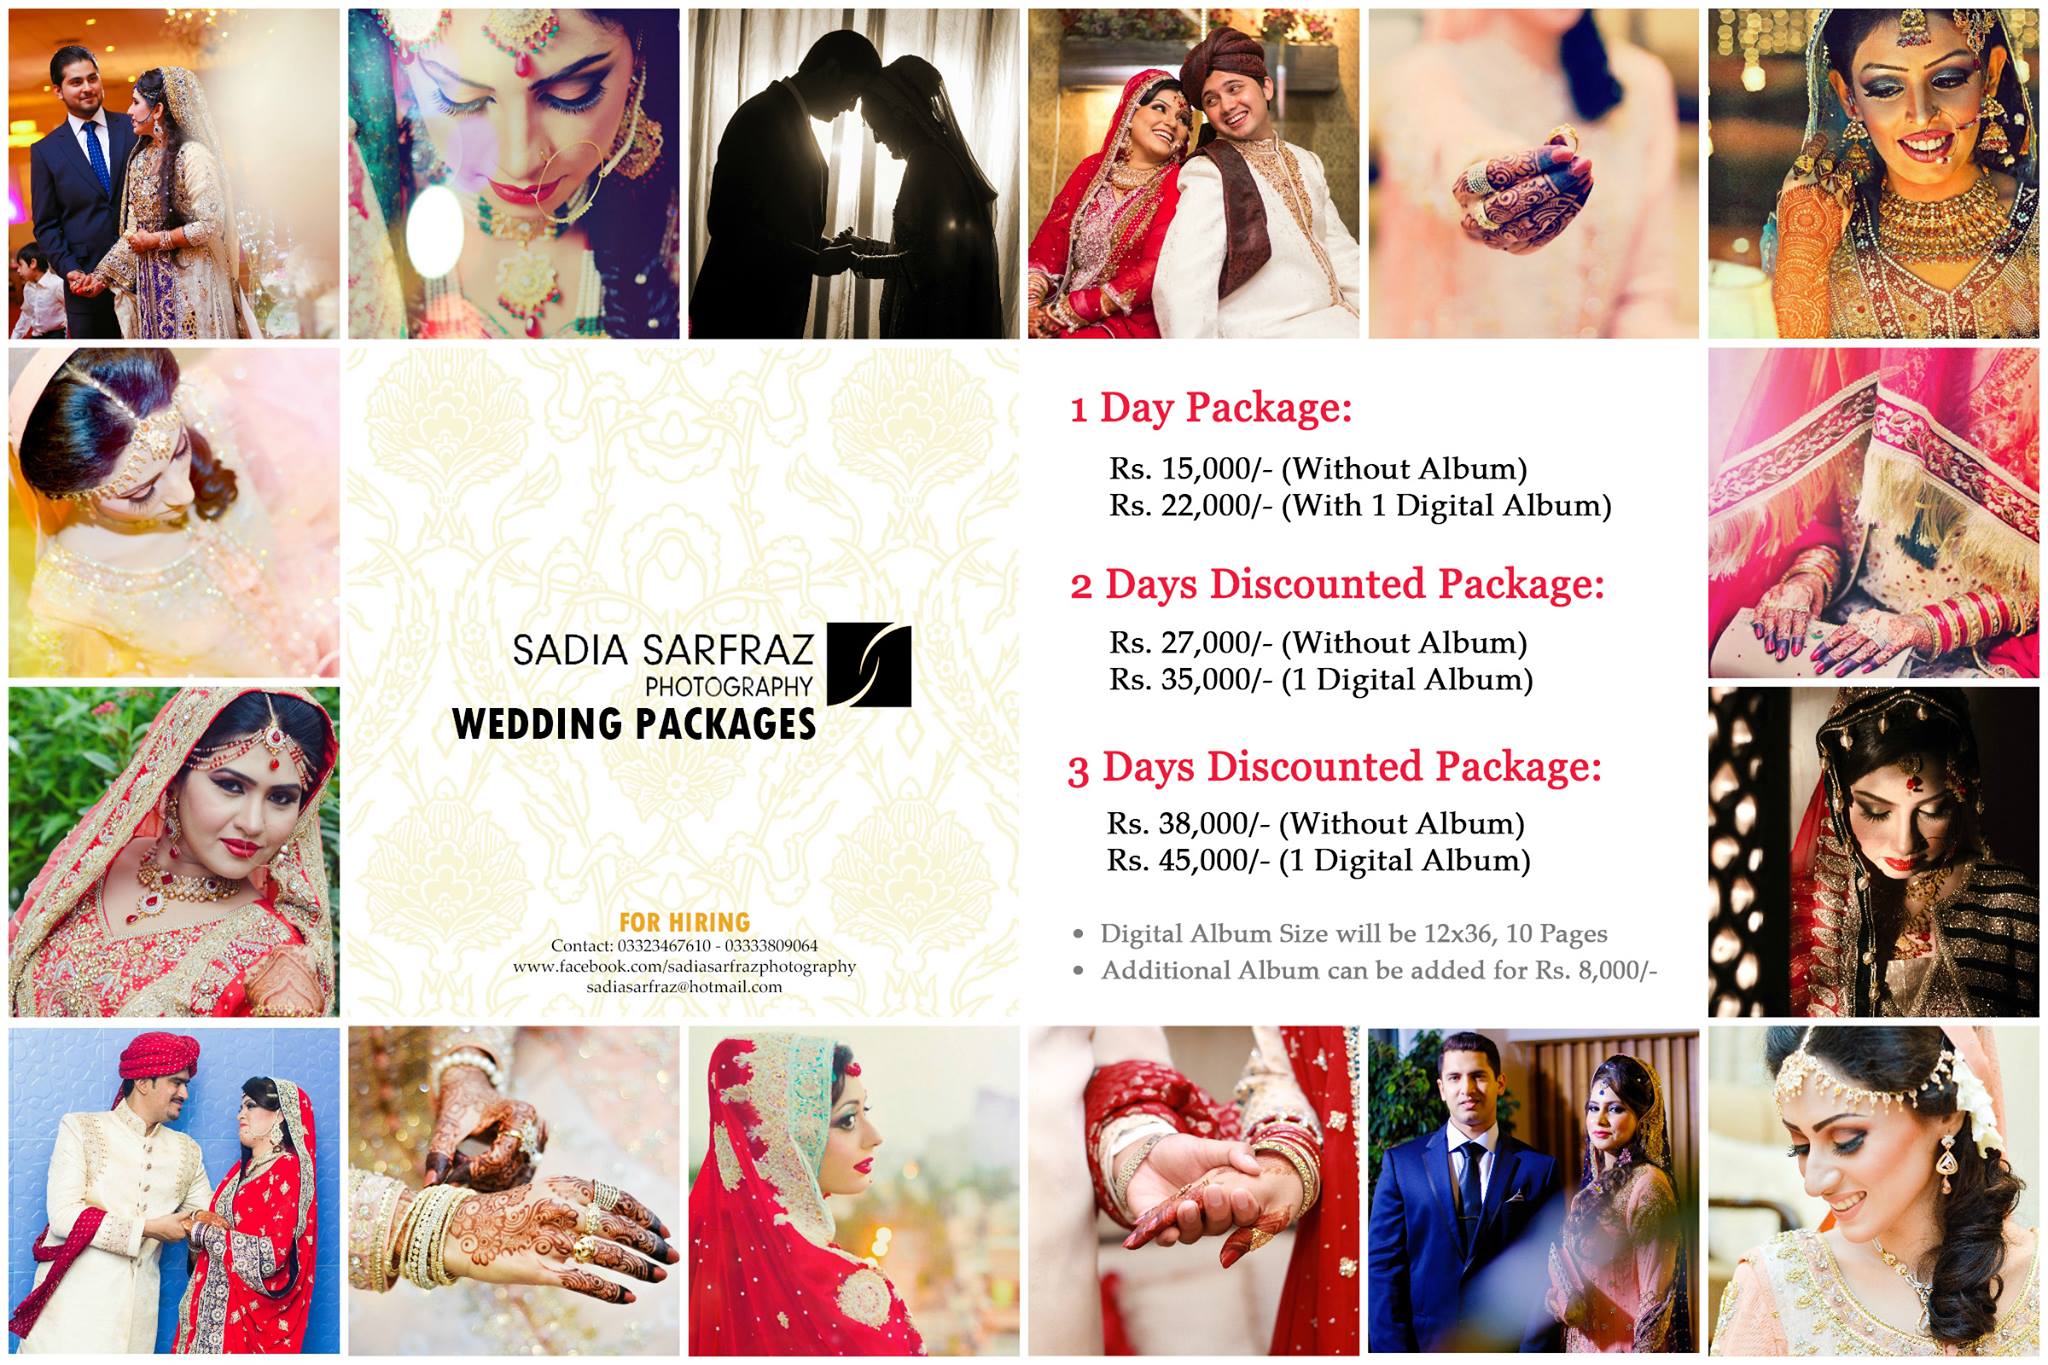 Most Amazing Wedding Photography Packages You Must Check Out